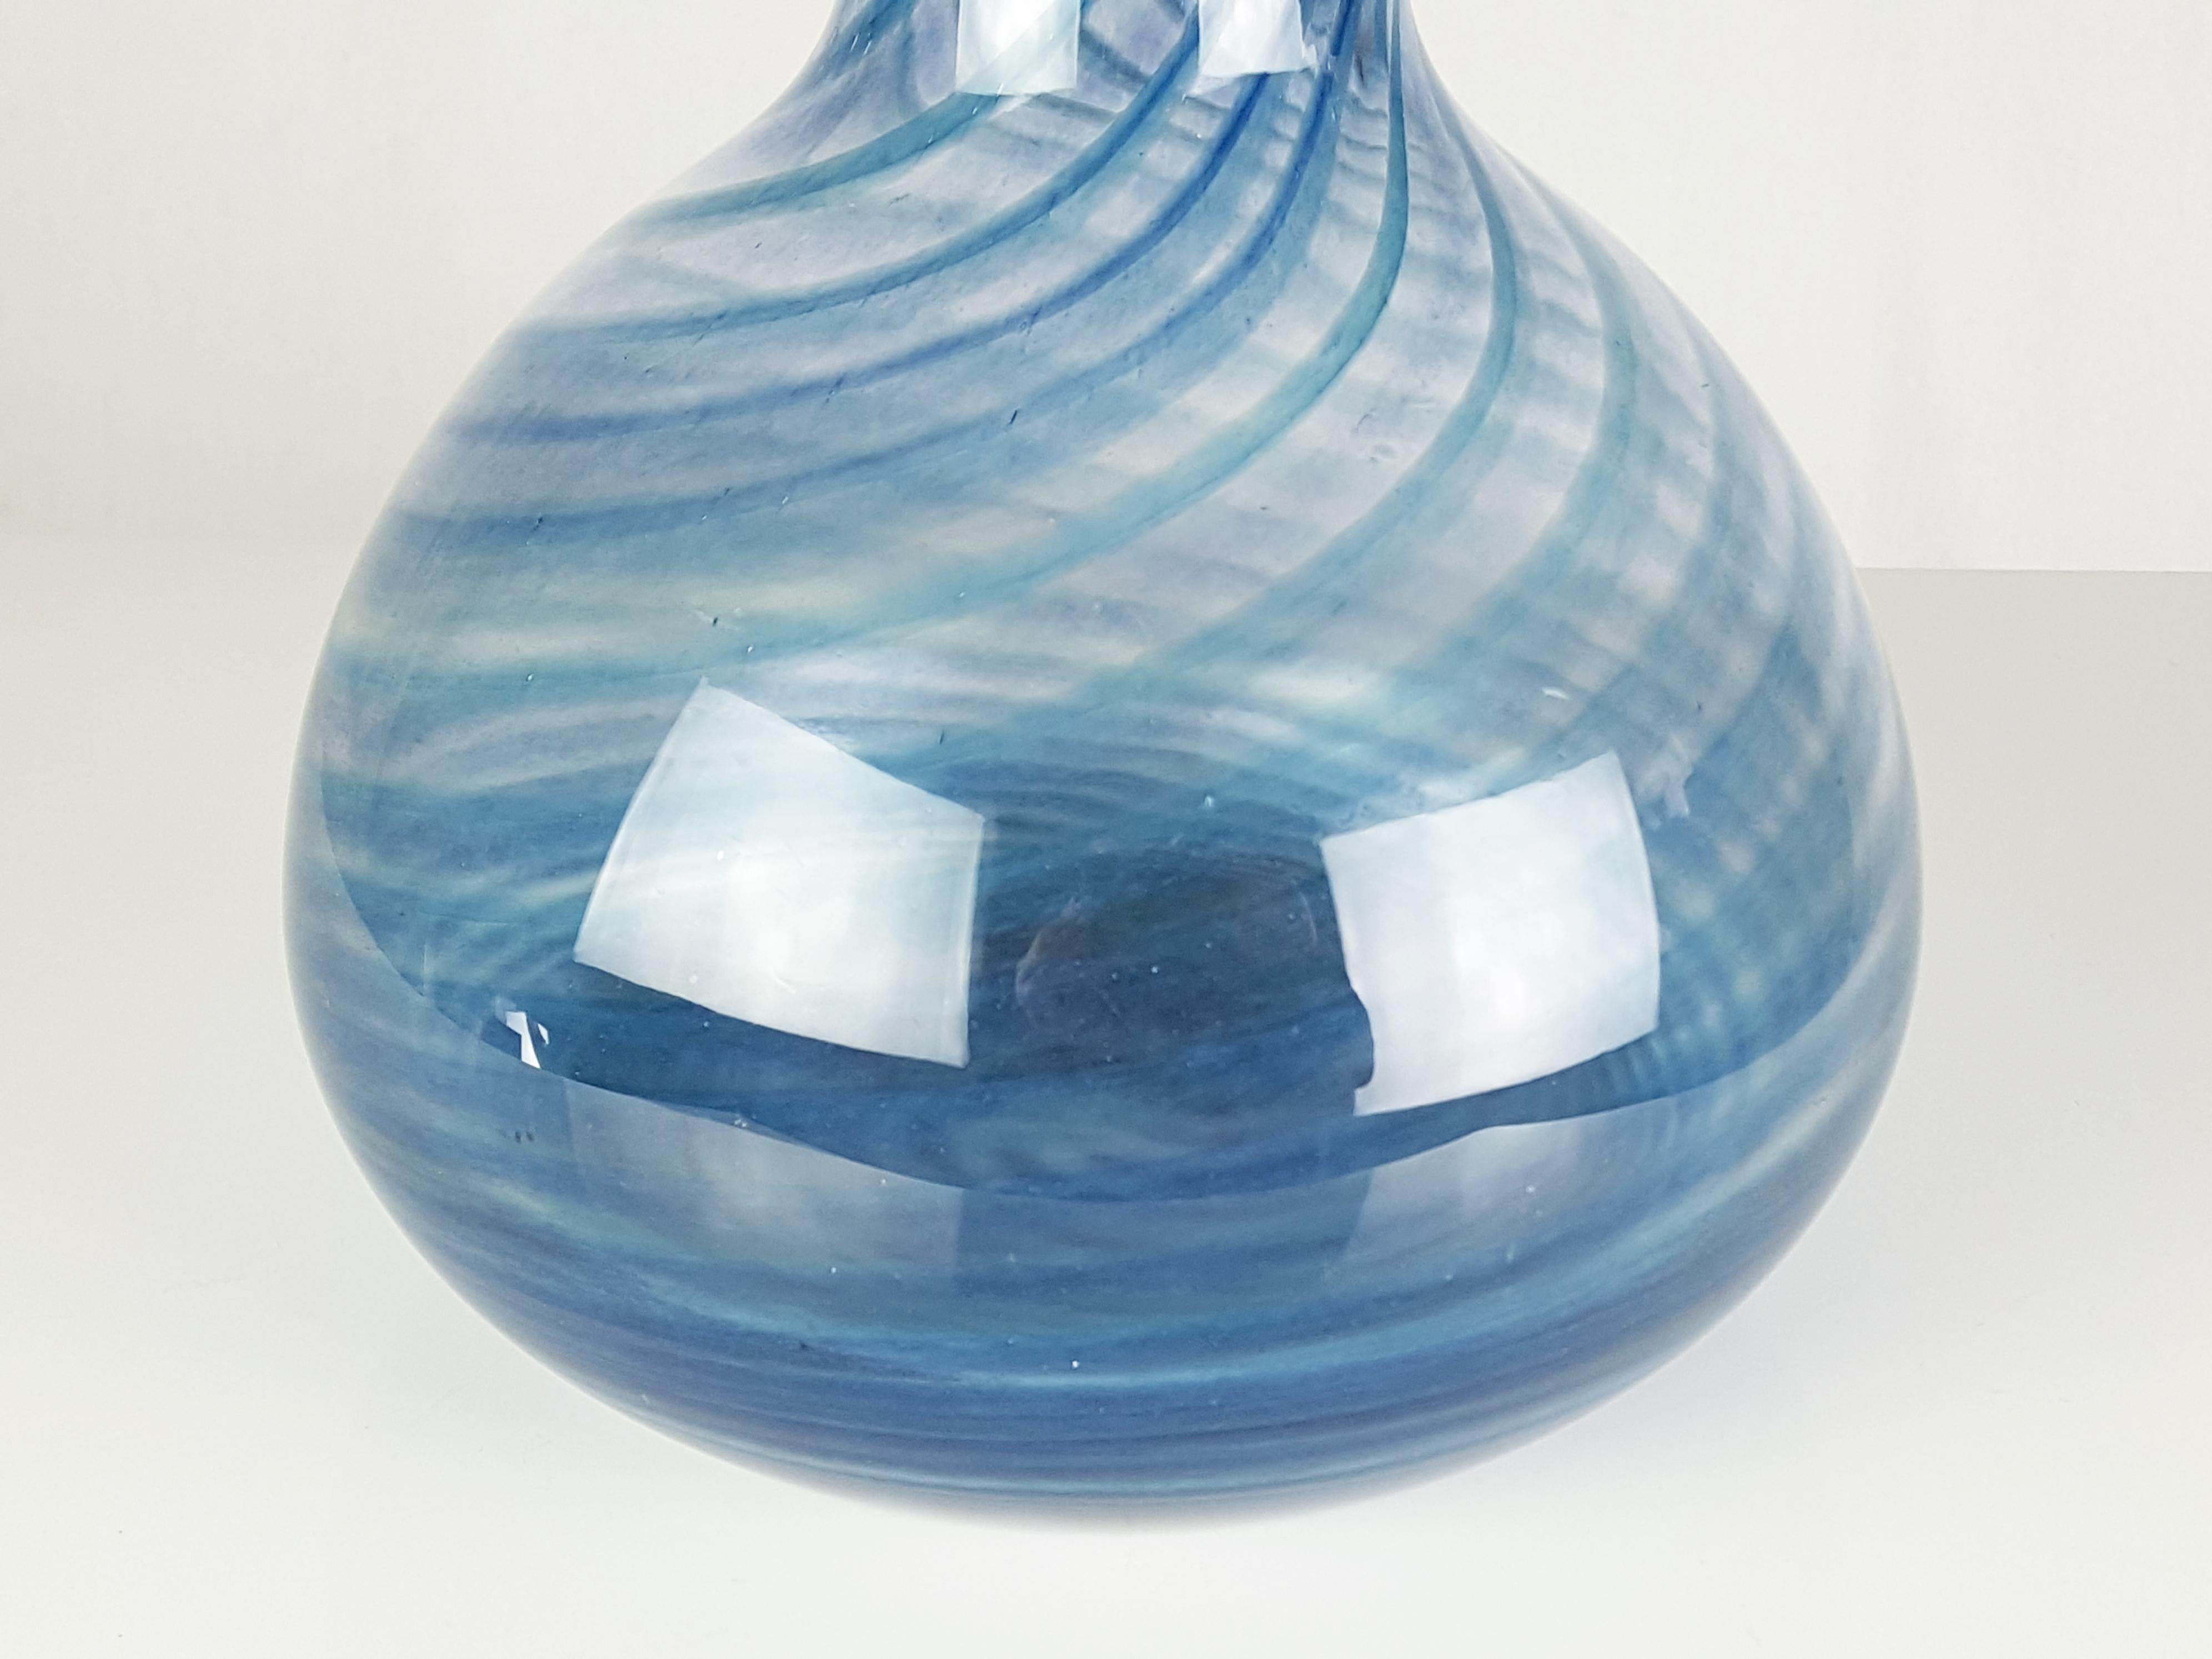 Space Age Blue & Clear Murano Glass 1960s-1970s Vase/Bottle Attributed to Barovier e Toso For Sale